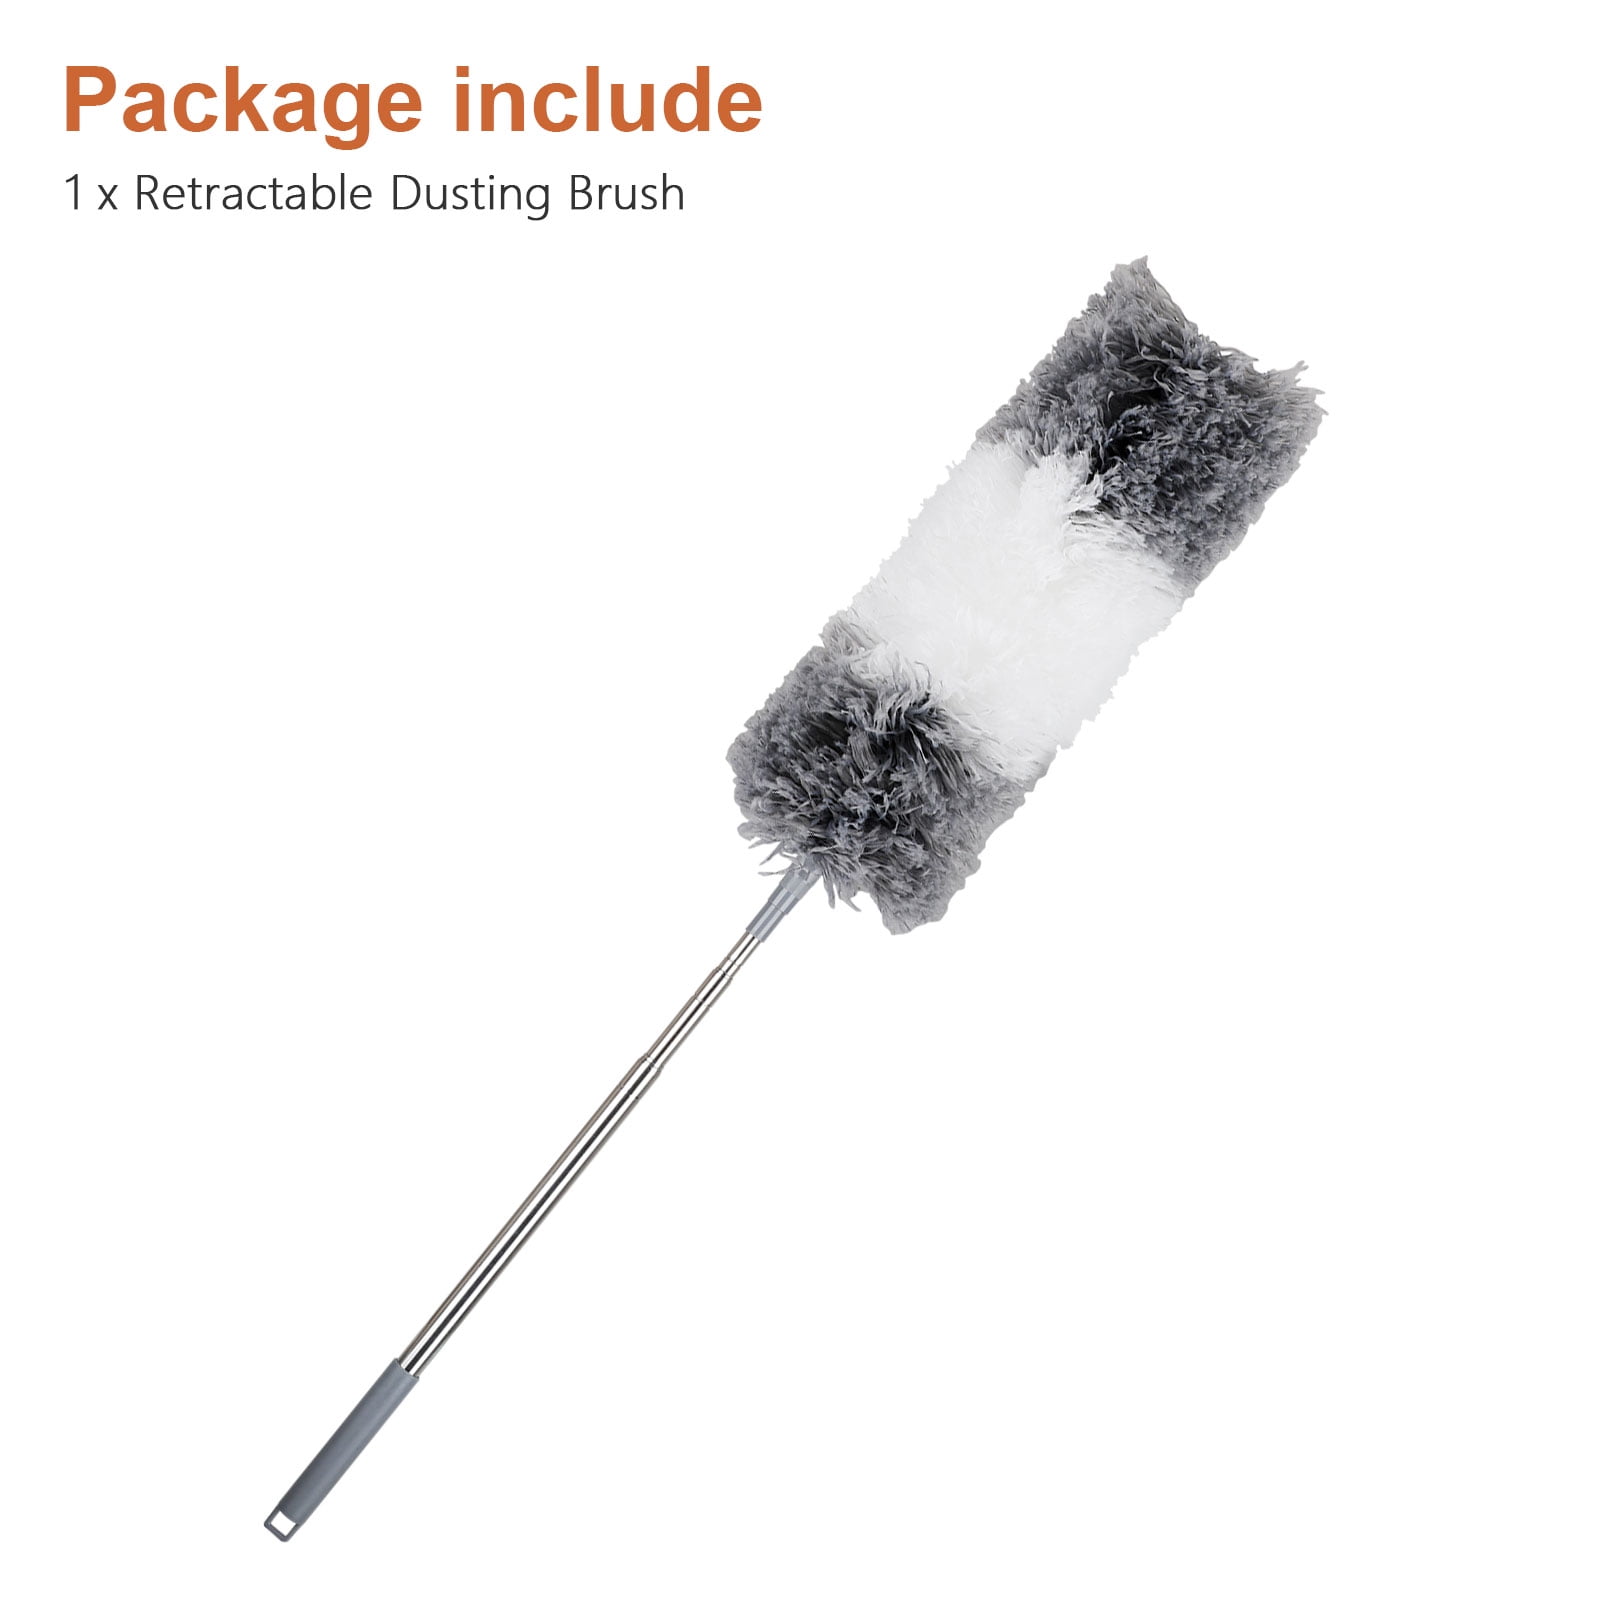 Ceiling Fan Duster with Extension Pole, Cobweb & Corner Brush Cleaning Kit W 2 Duster Heads for Cleaning,15-100 inch Long Handle Aluminum